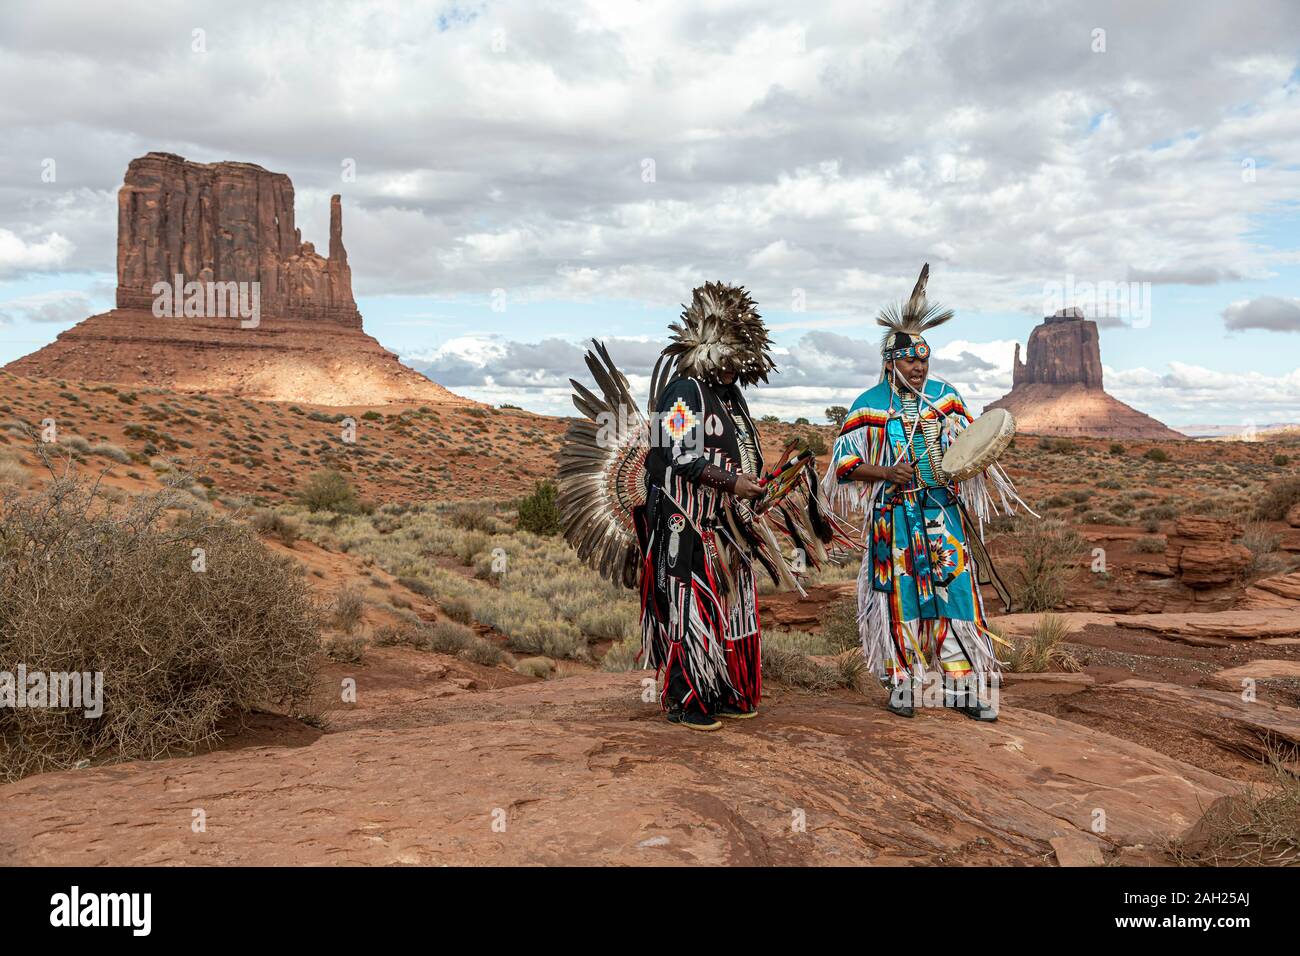 Navajo Dancers, West Mitten Butte (left) and East Mitten Butte in background, Monument Valley, Arizona and Utah border, USA Stock Photo